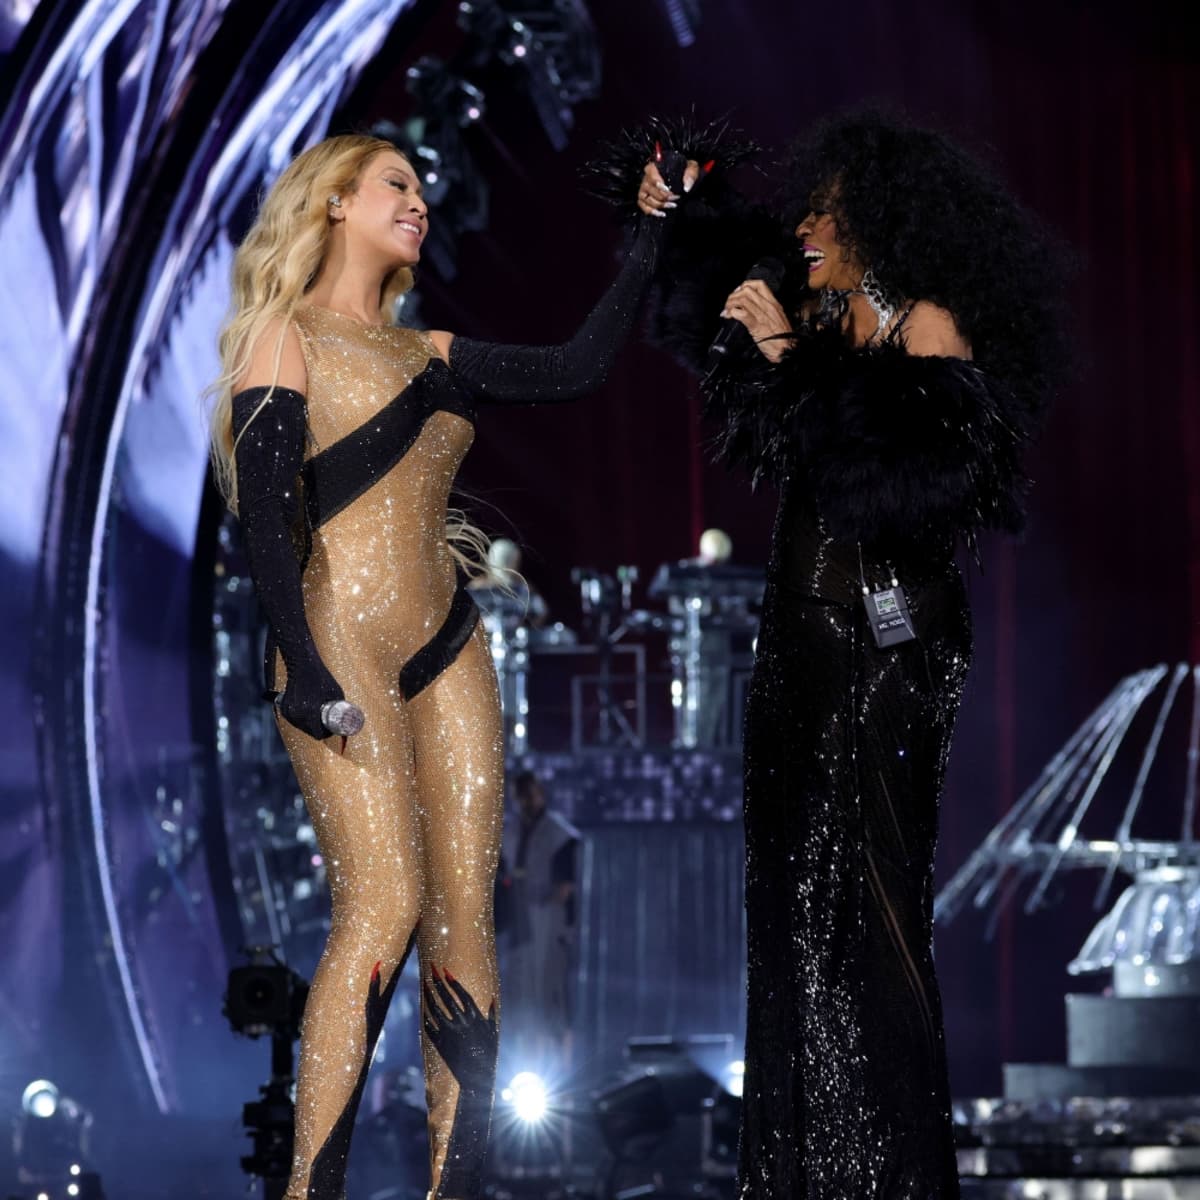 Beyoncé Thanks Diana Ross for Surprise Appearance at Her L.A. Show